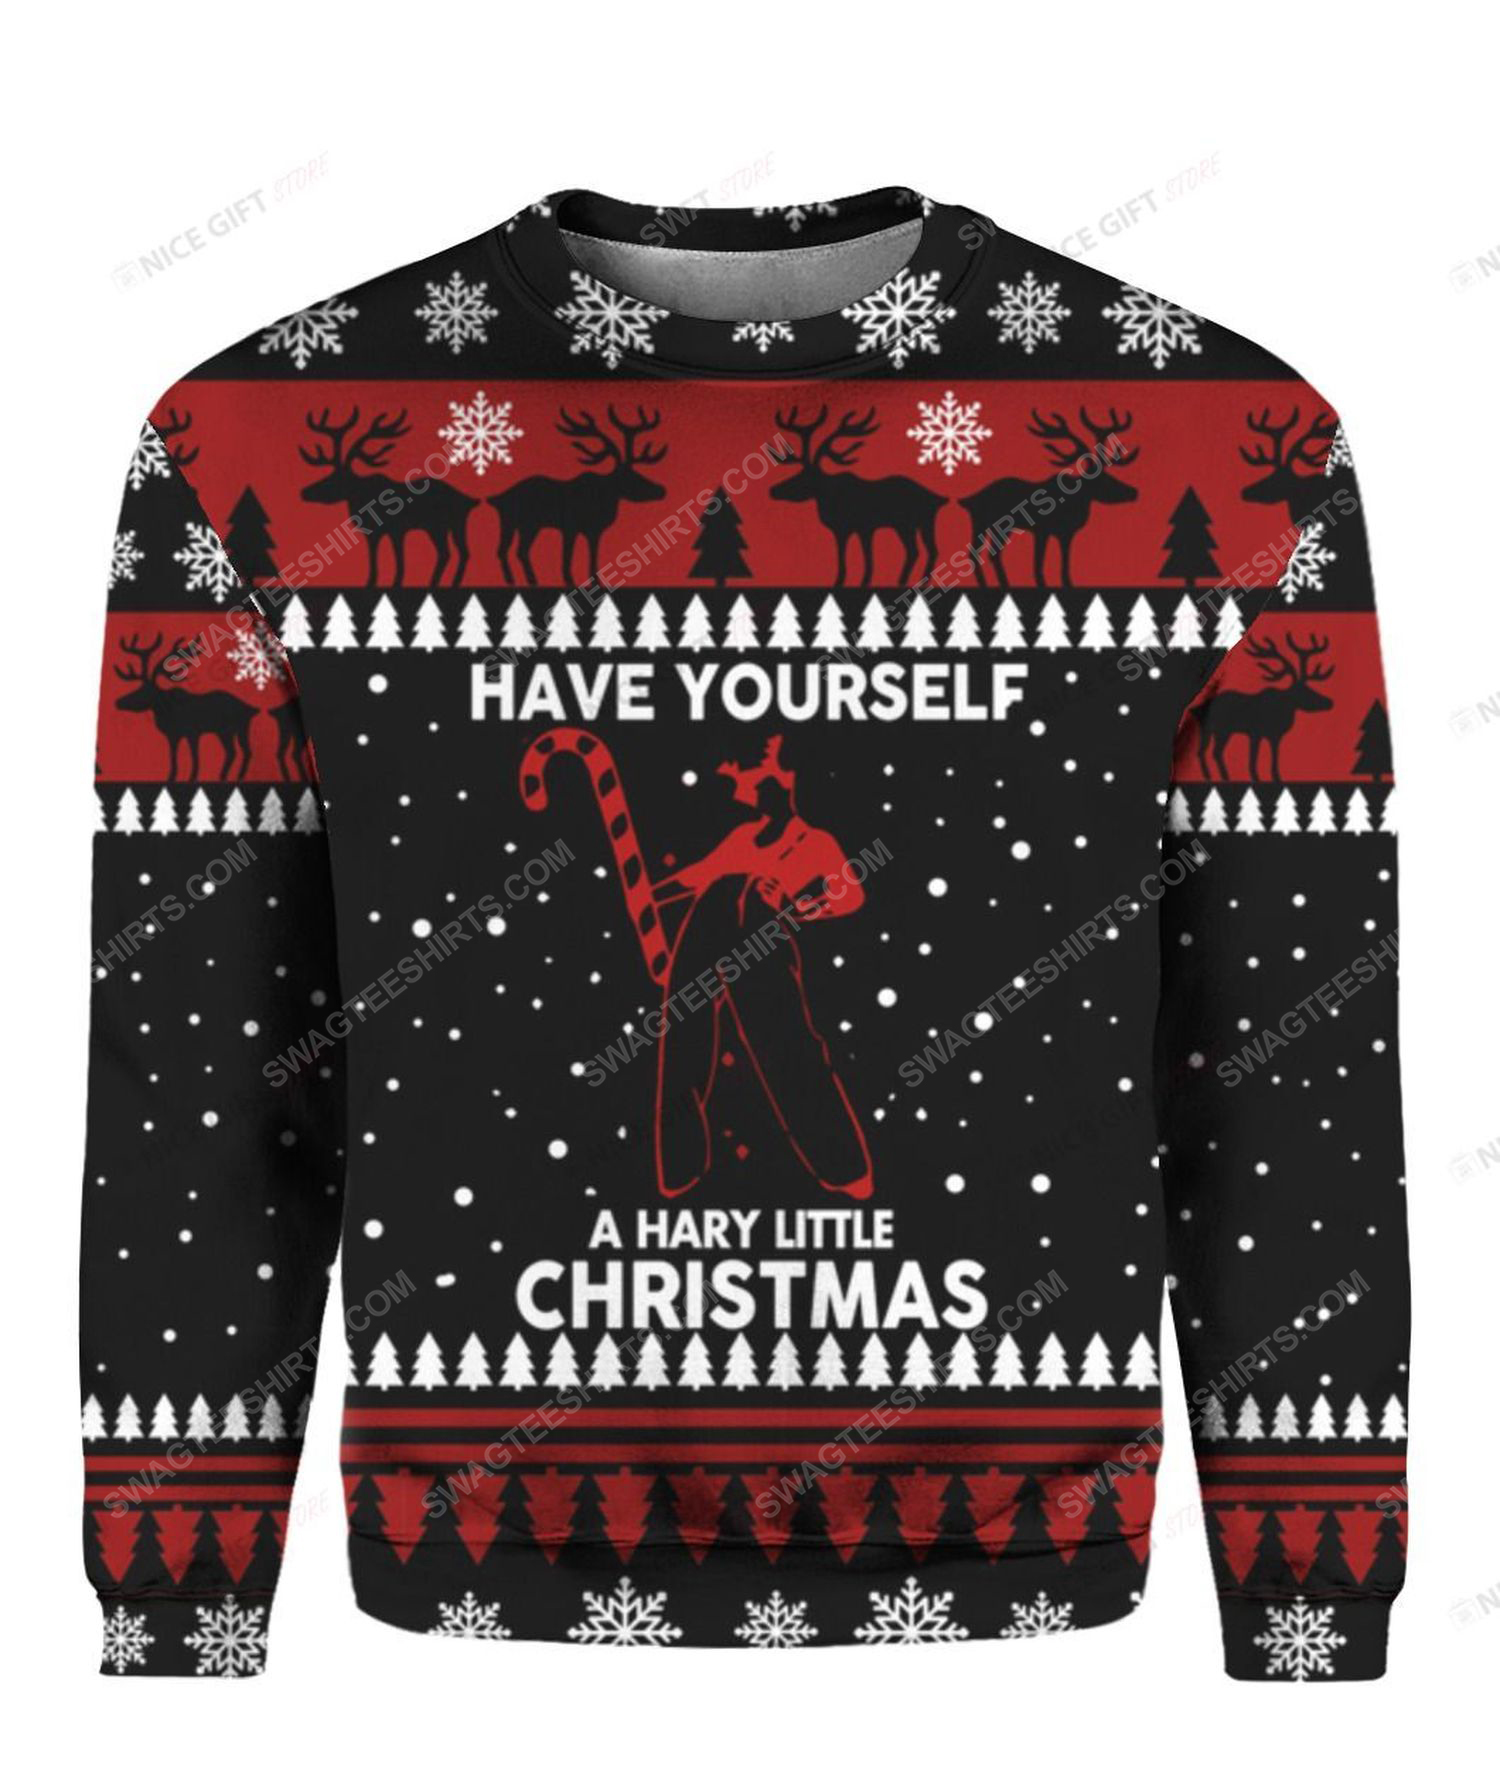 Have yourself a hary little christmas ugly christmas sweater 1 - Copy (2)